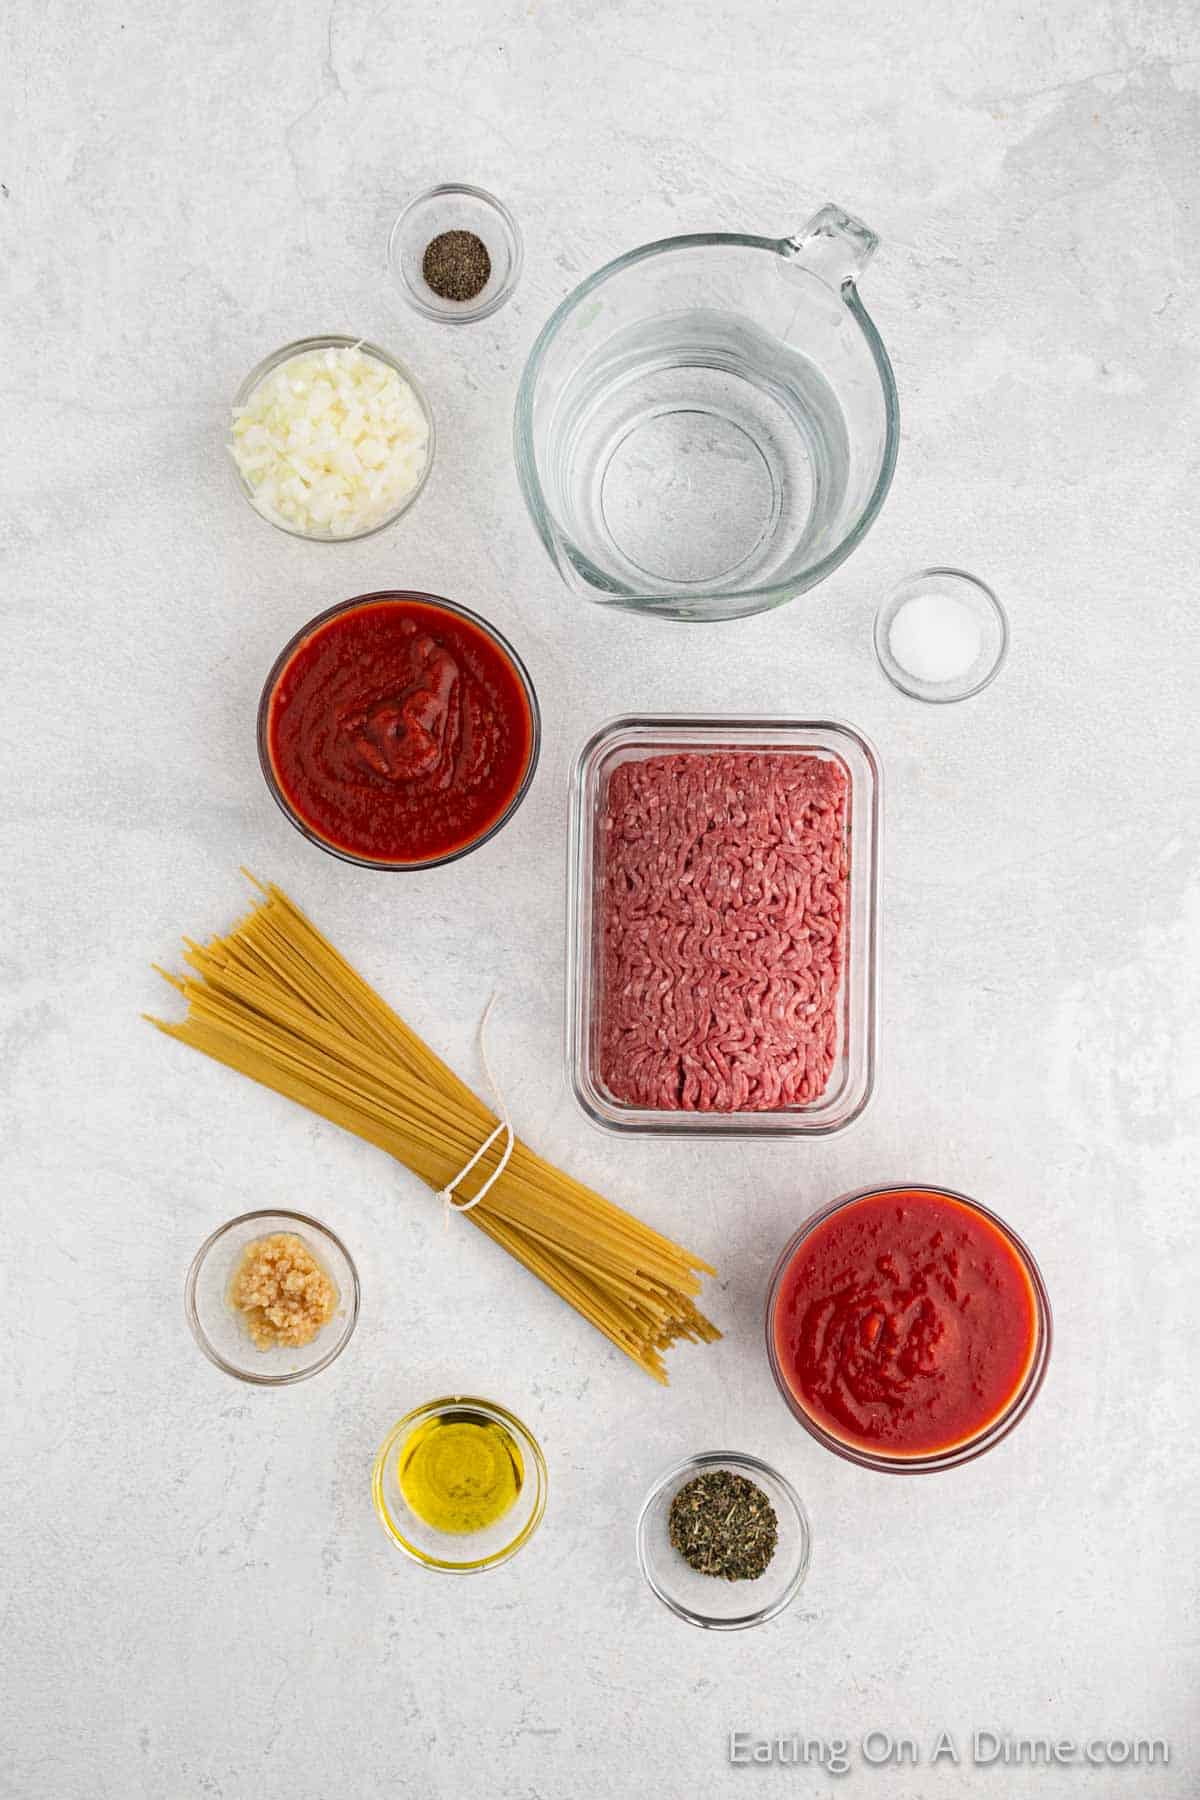 Instant pot spaghetti ingredients - olive oil, onion, minced garlic, ground beef, salt, pepper, italian seasoning, crushed tomatoes, tomato sauce, water, spaghetti noodles